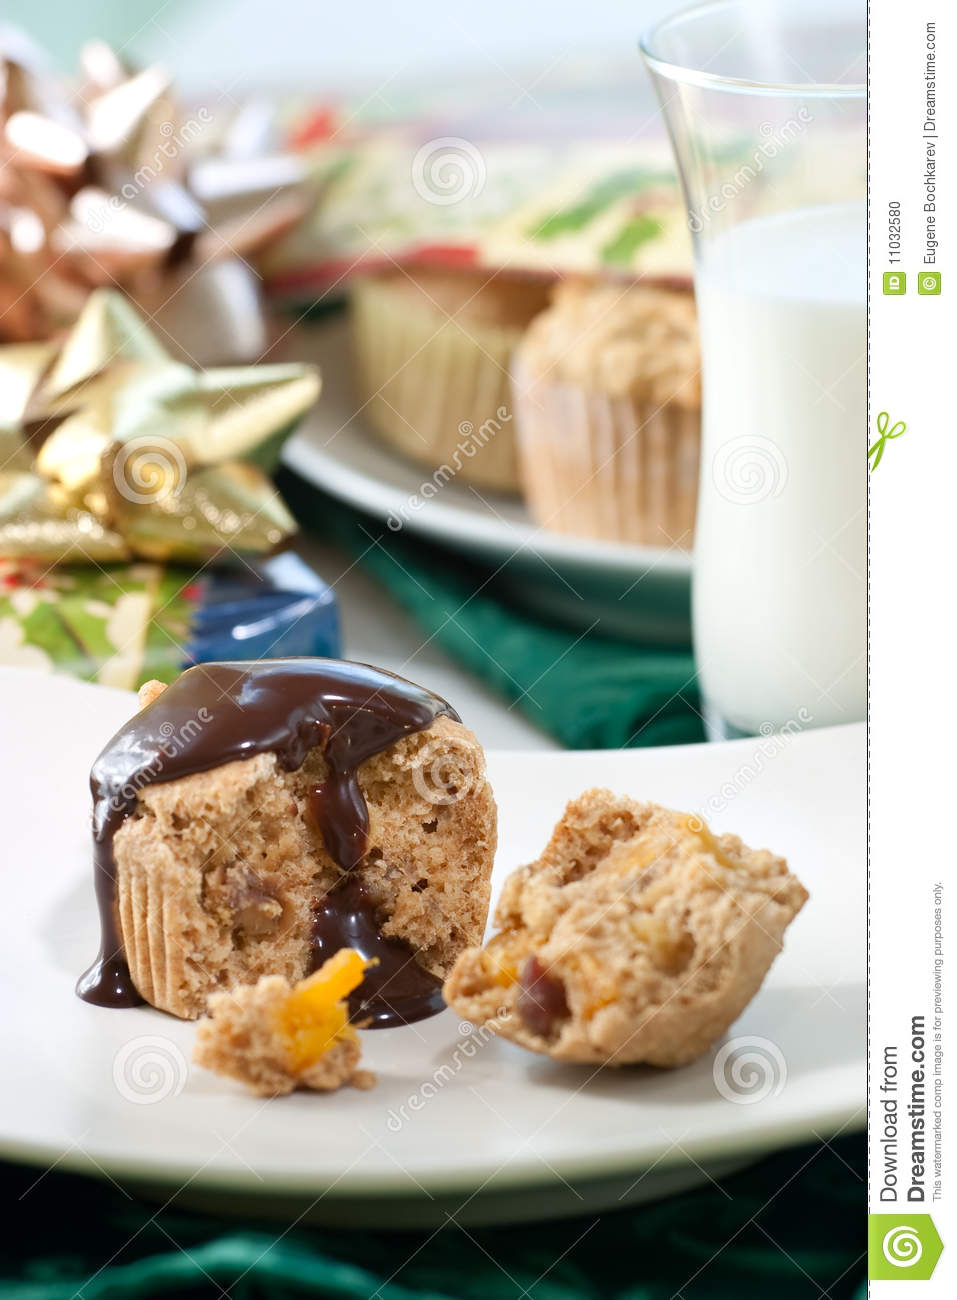 Whole Grain Muffins With Chocolate Sauce Surrounded By Holiday Wrapped